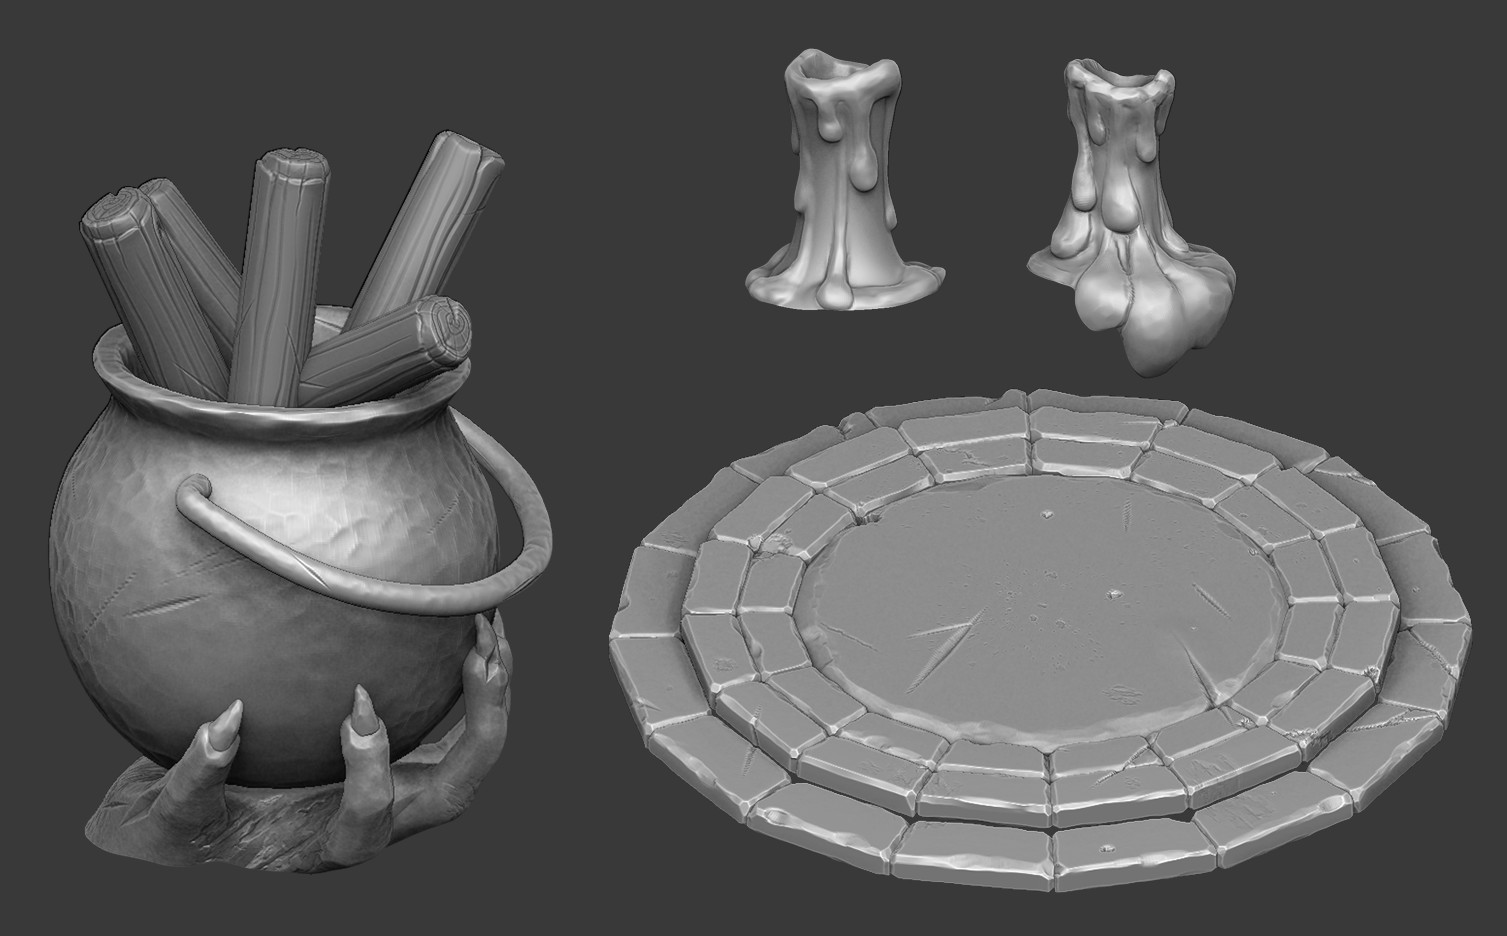 Zbrush sculpts of the props used to build the scene